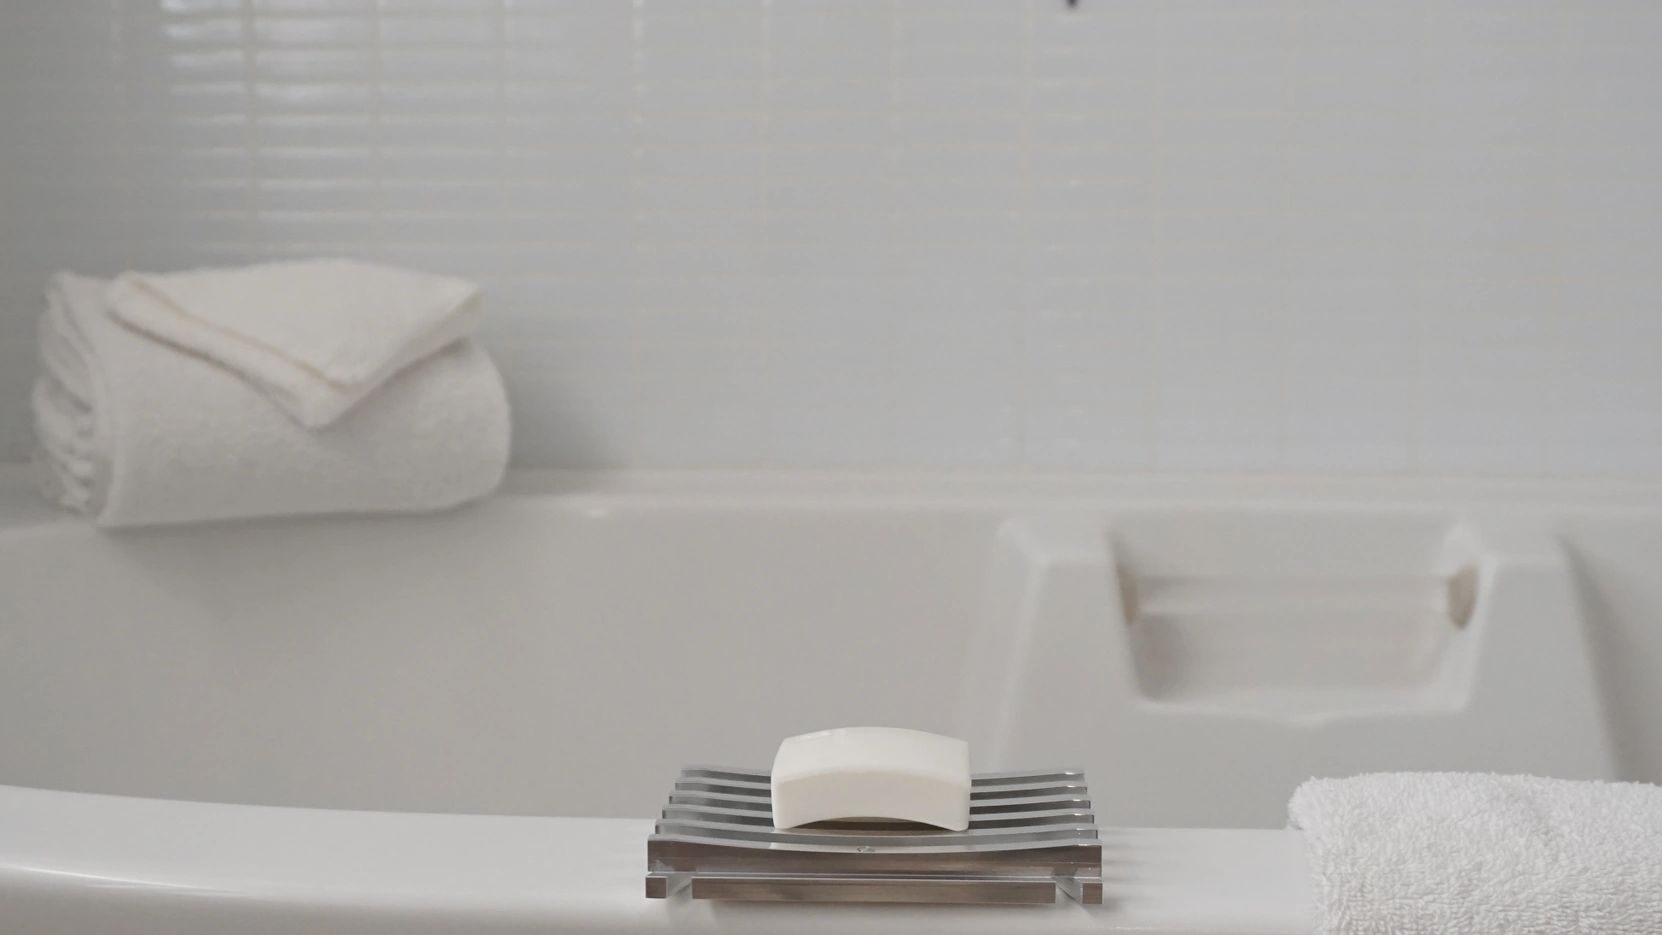 This shows the elegance of our soap dish product and how it can be used in a bathroom.